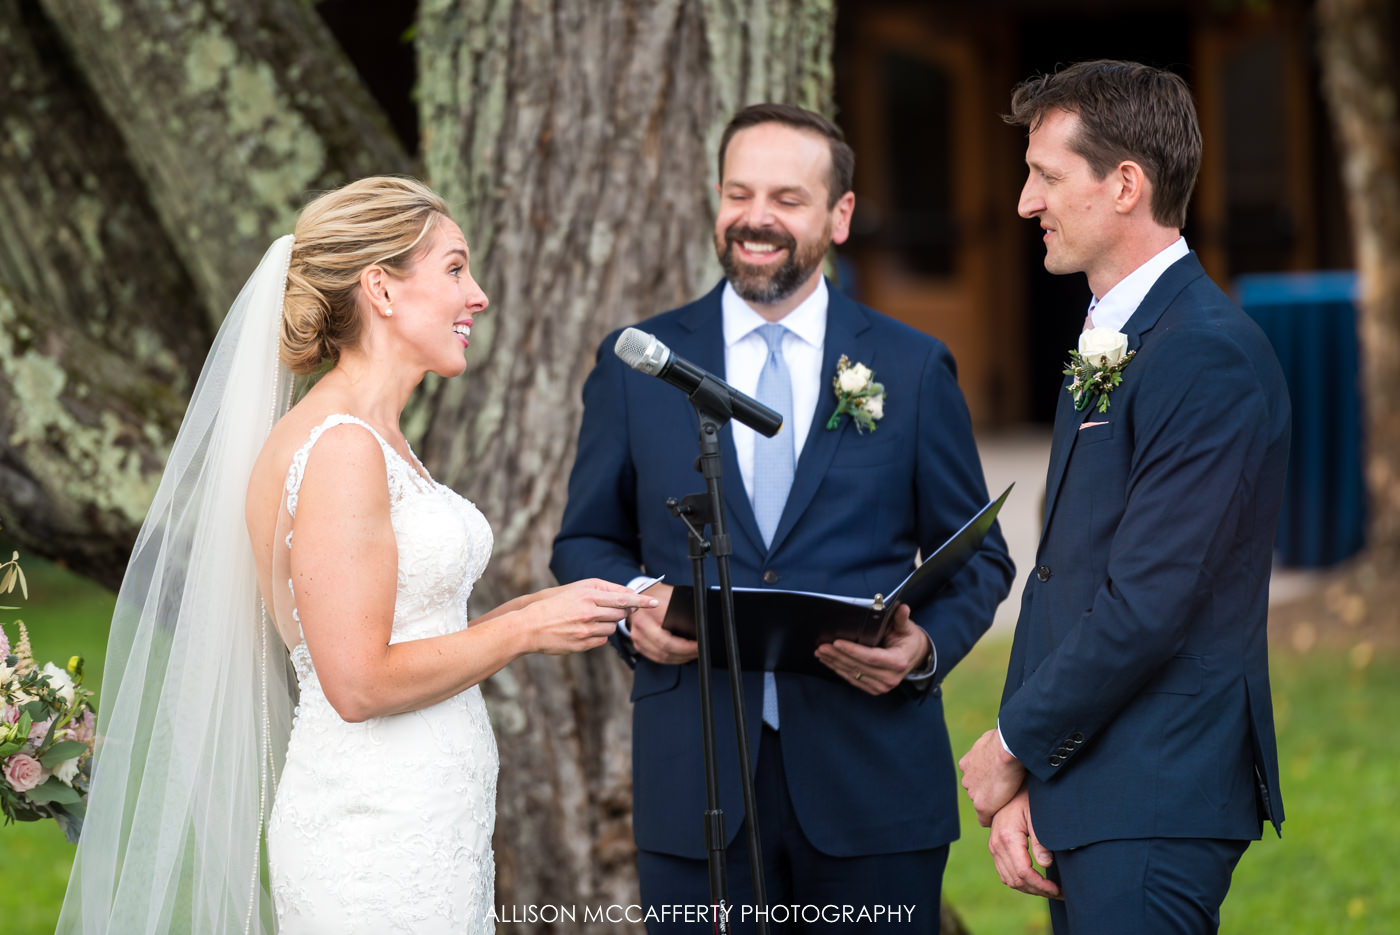 Outdoor ceremony at Rose Bank Winery